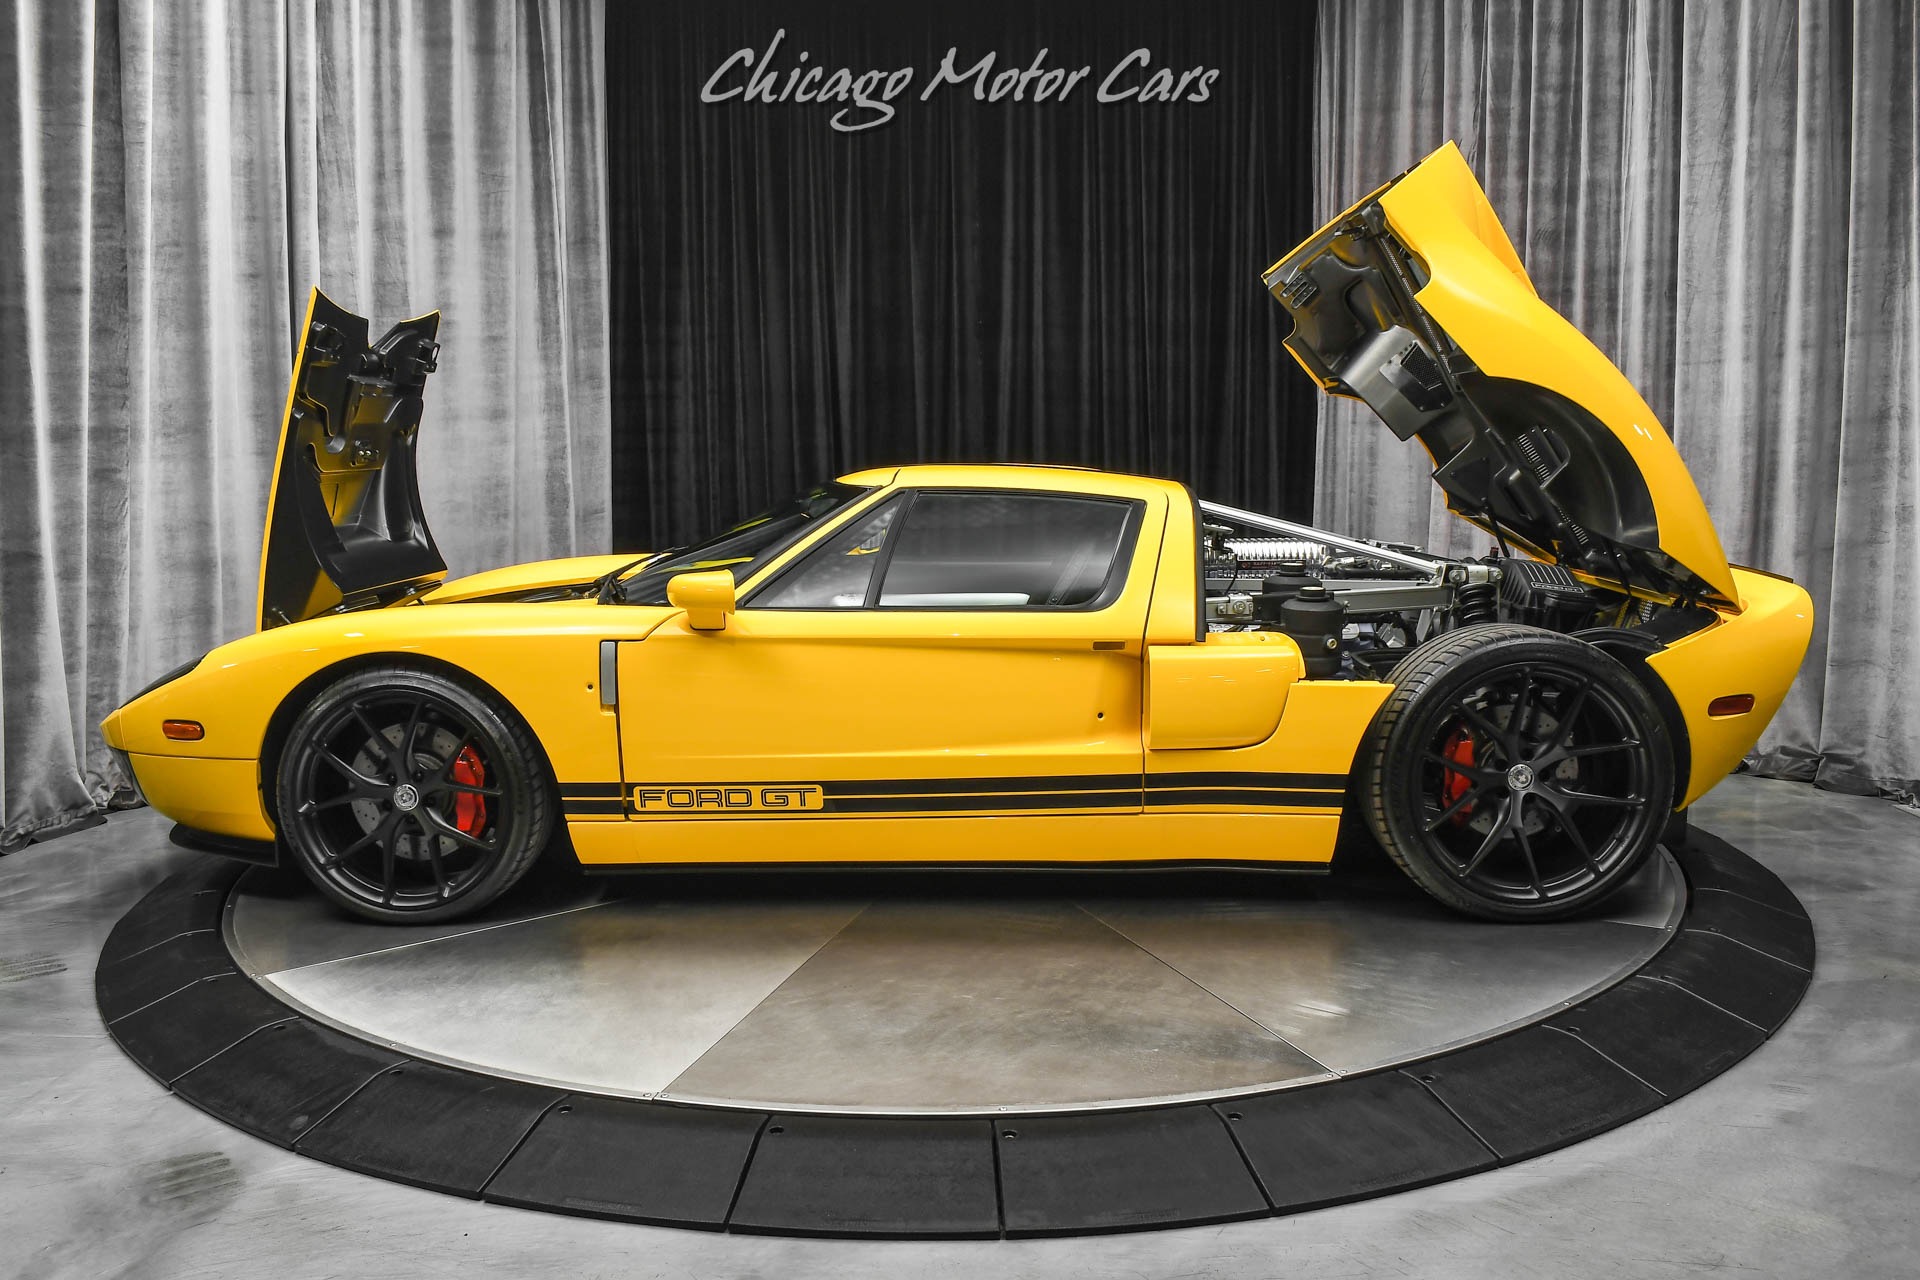 Used-2005-Ford-GT-Super-RARE-Yellow-HRE-Wheels-Whipple-Supercharger